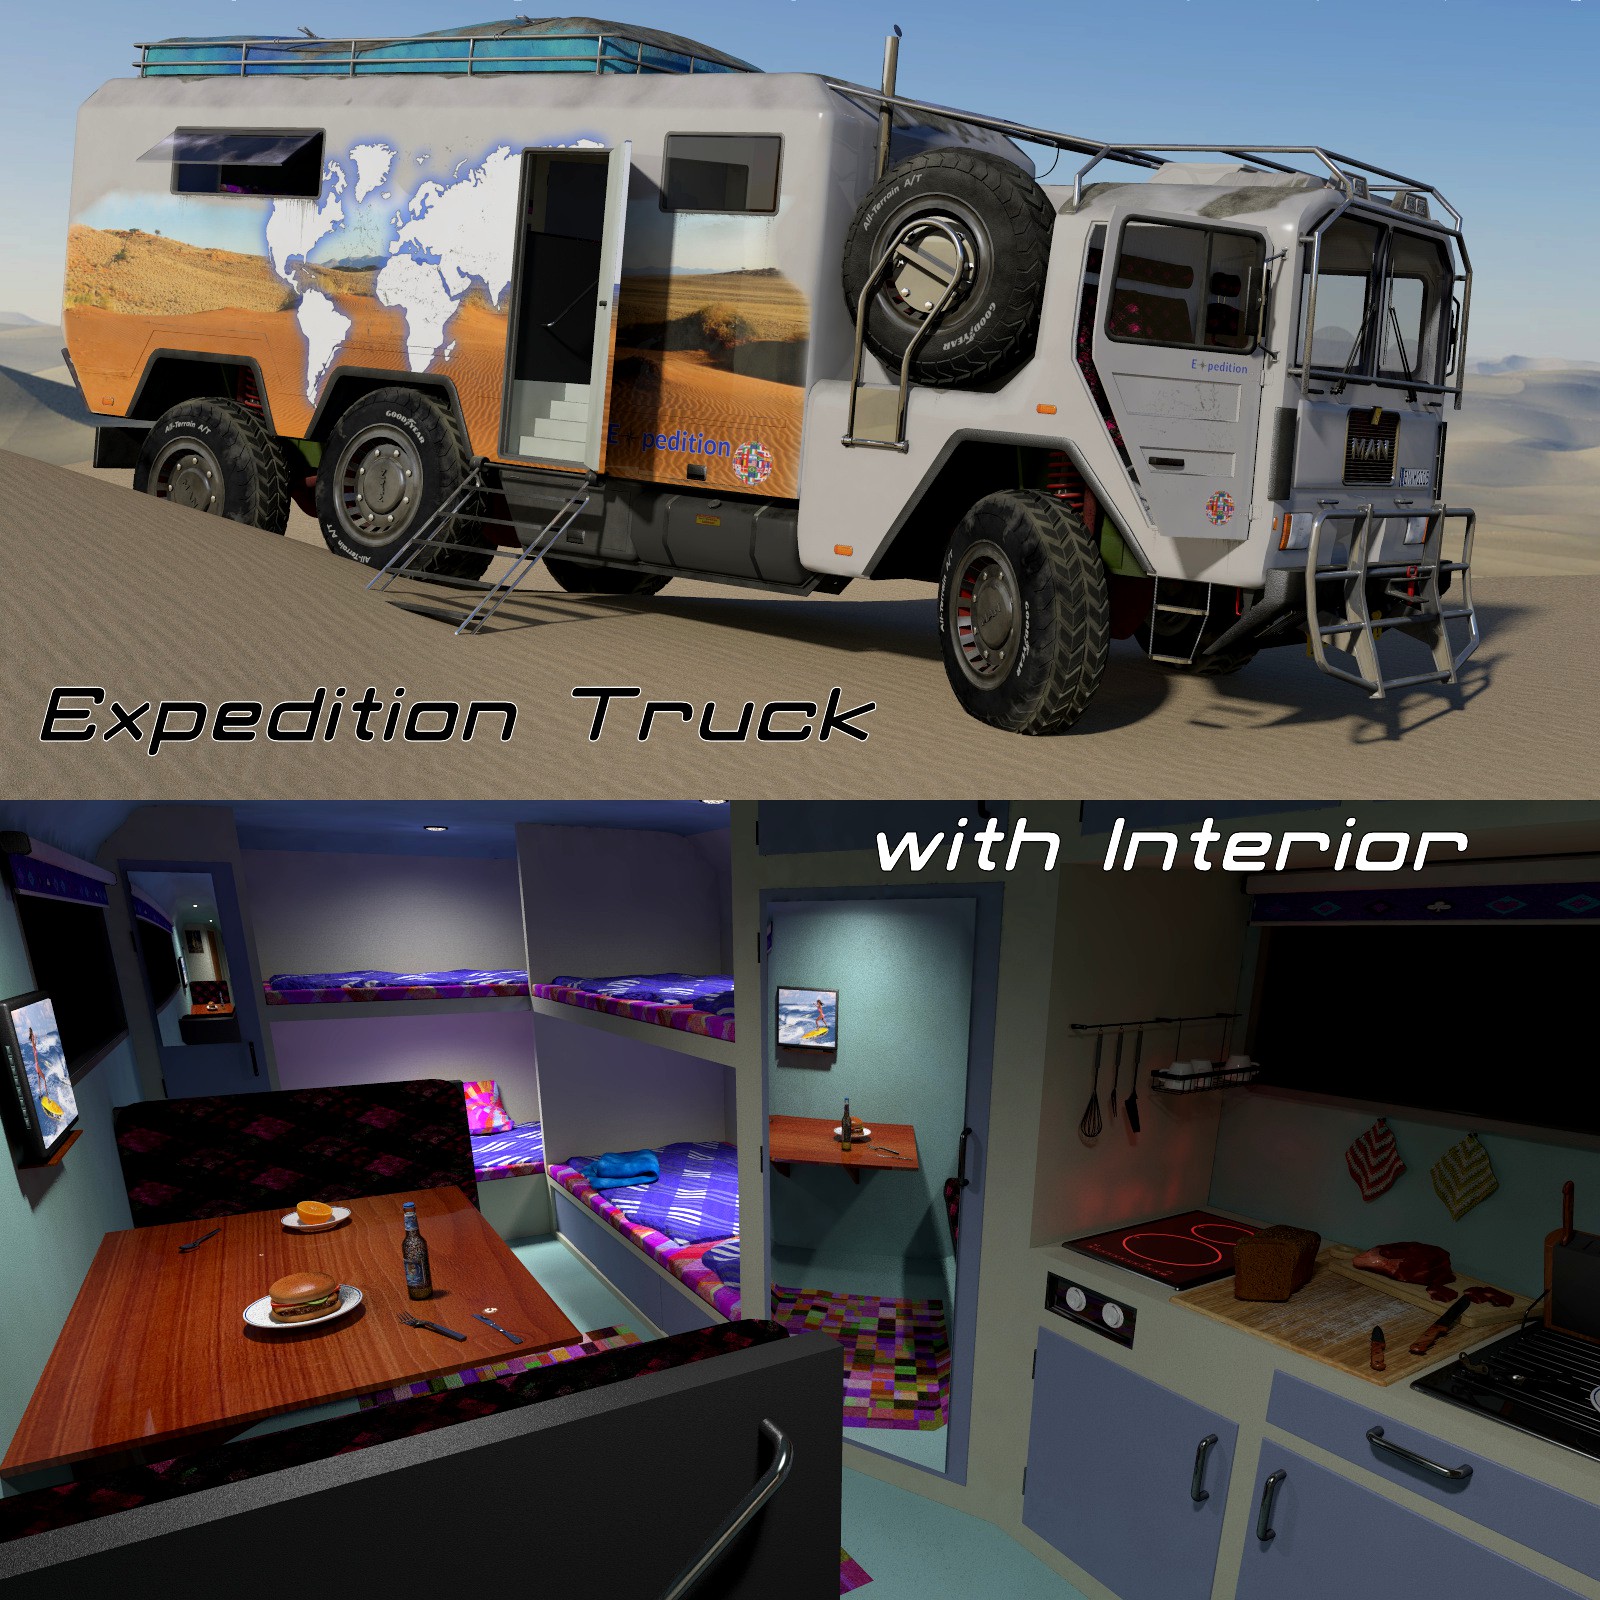 EXPEDITION TRUCK